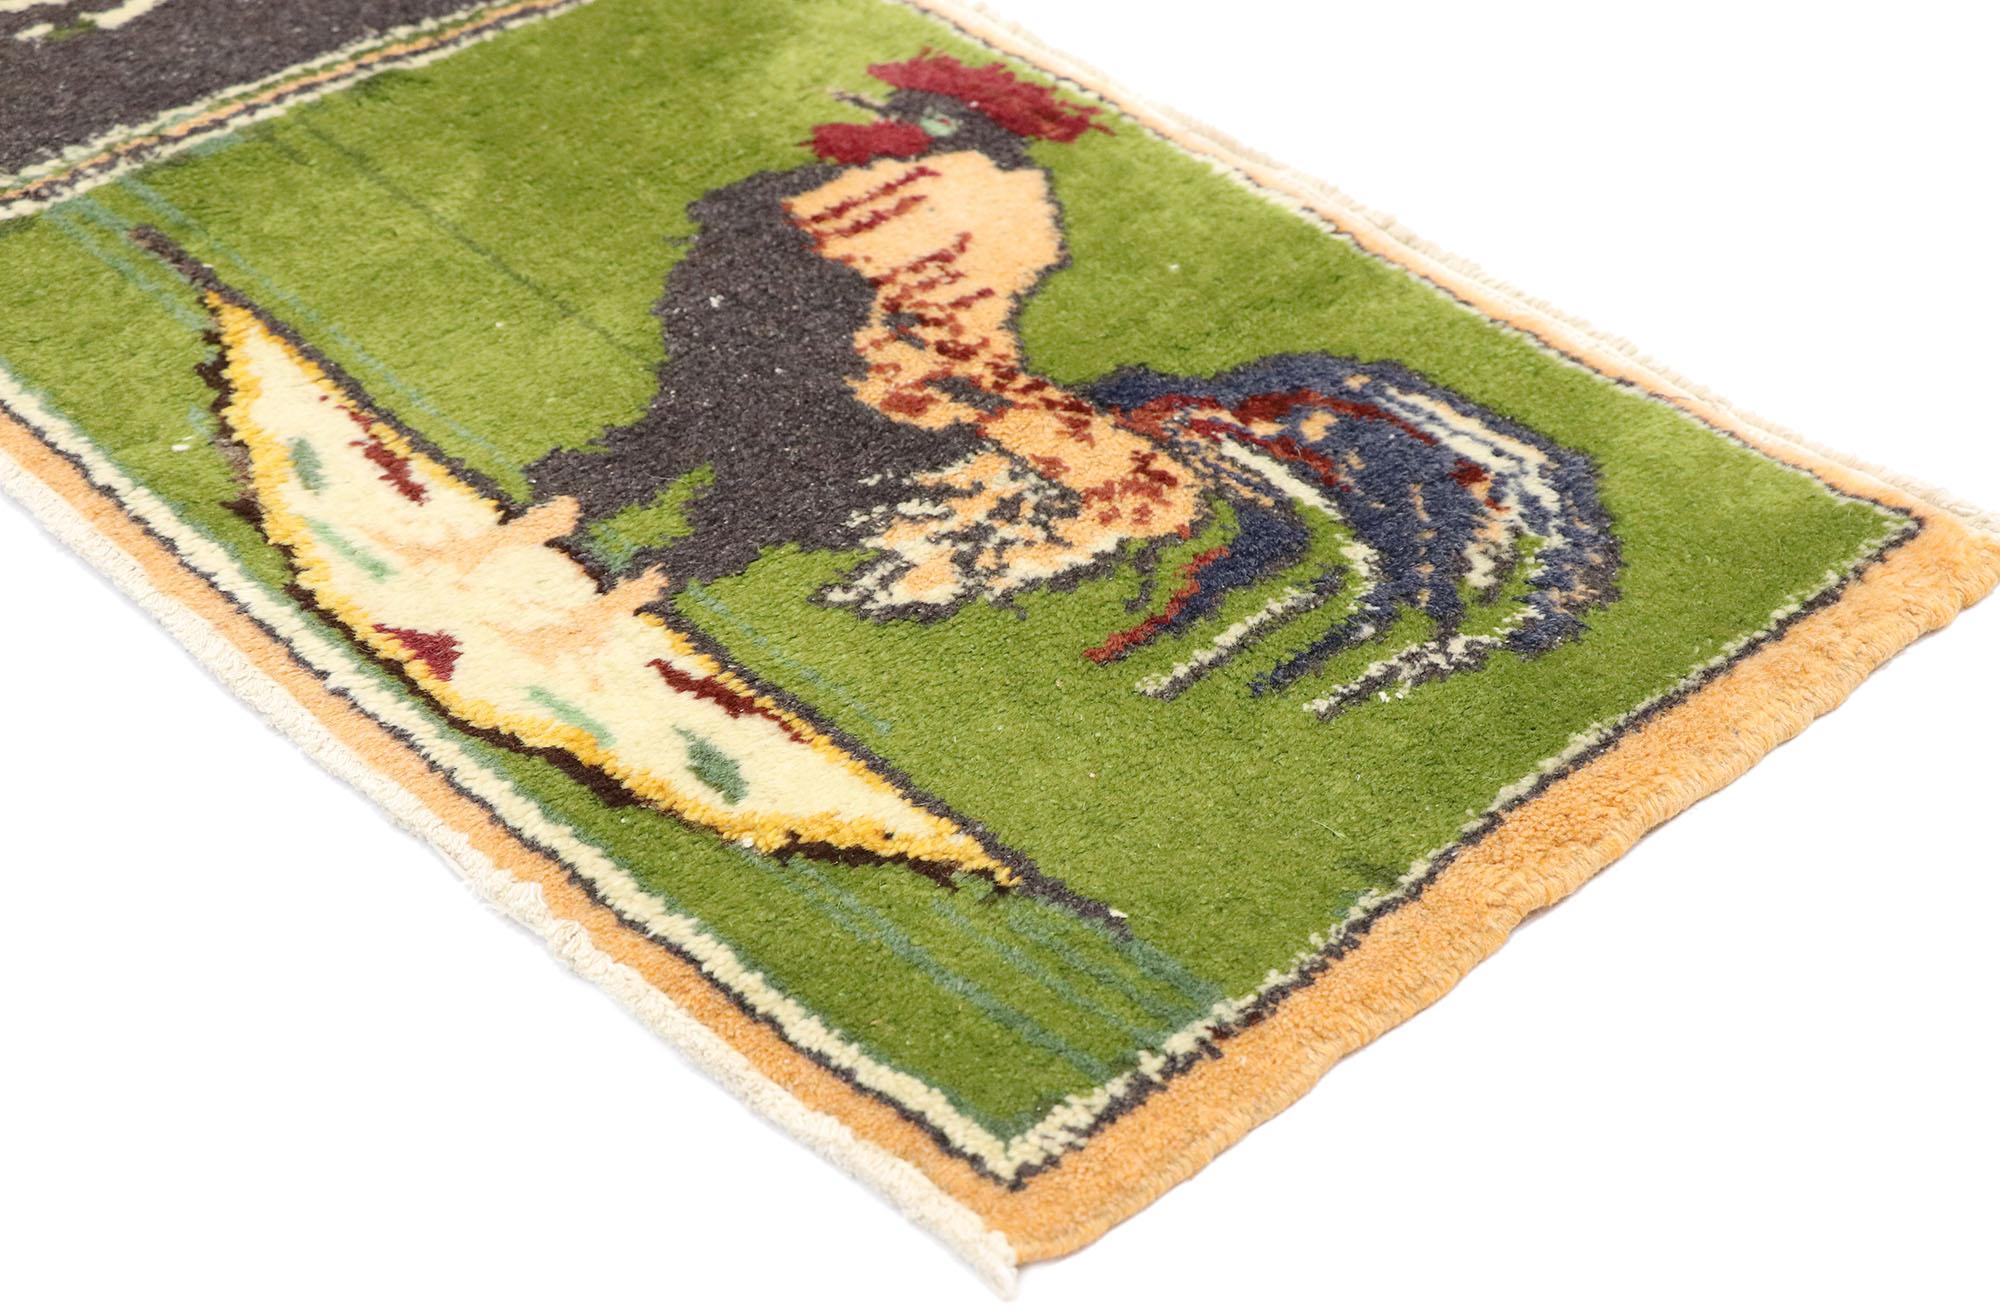 53483, vintage Turkish Pictorial rug with animals and Folk Art French Country style 01'06 x 06'11. Folk Art meets French Country style in this vibrant hand-knotted wool vintage Turkish pictorial rug. The abrashed field features a color-blocked field